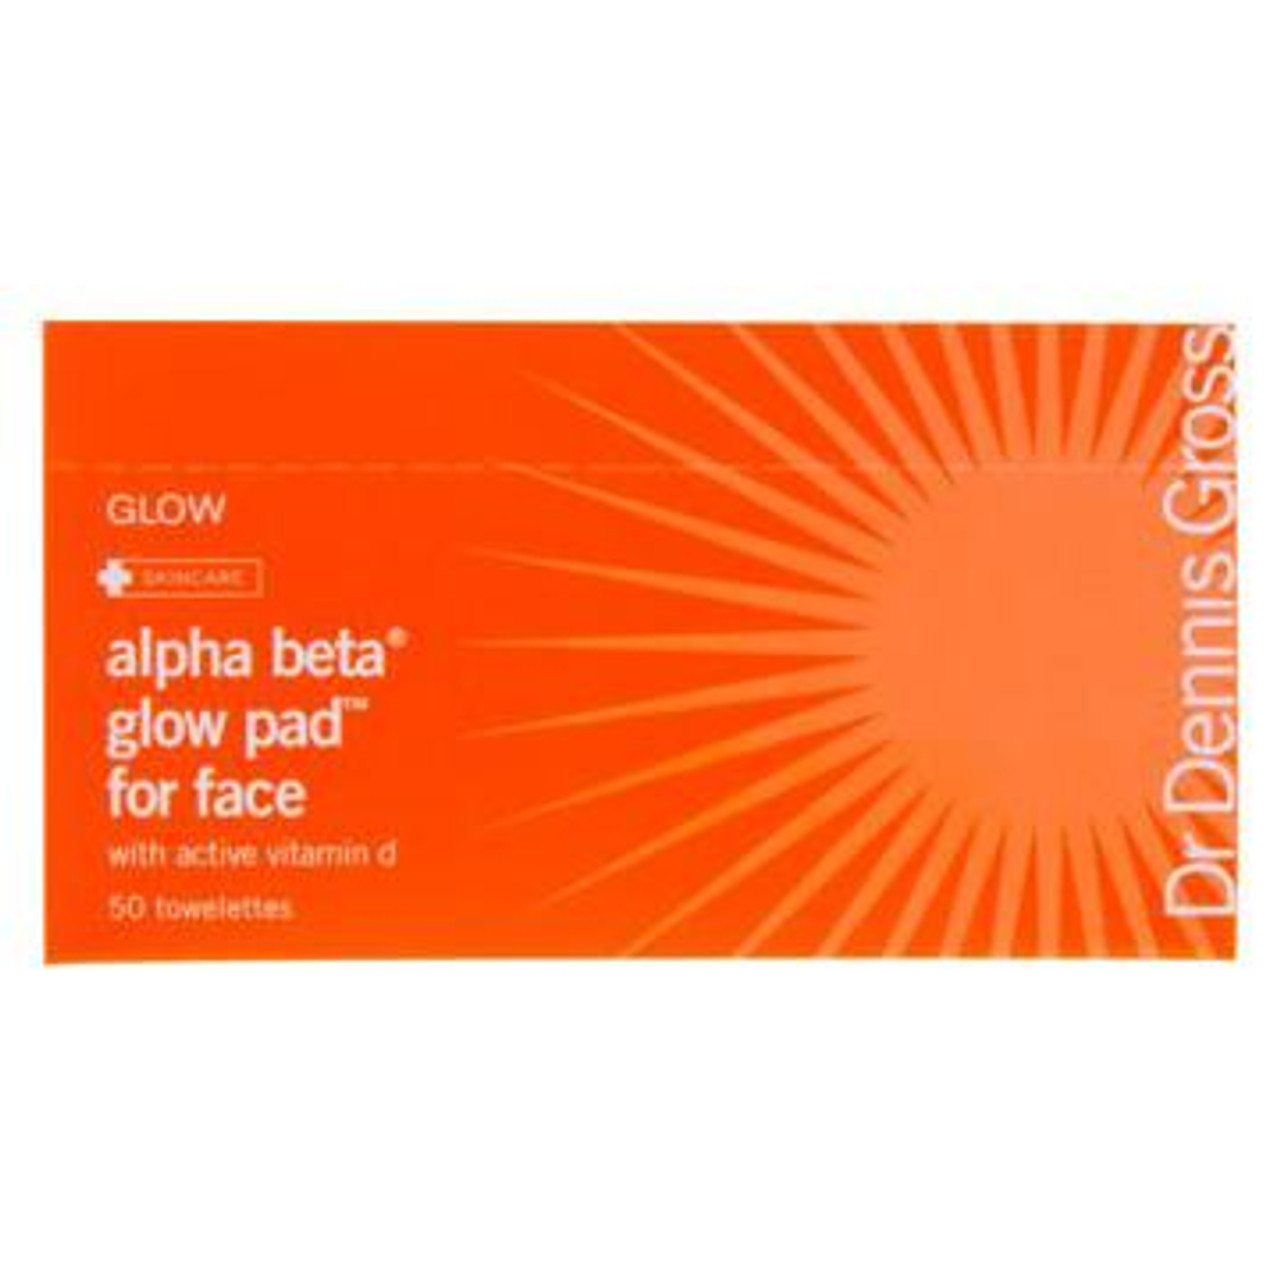 Dr. Dennis Gross Skincare Alpha Beta Glow Pad For Face - 50 Towelettes